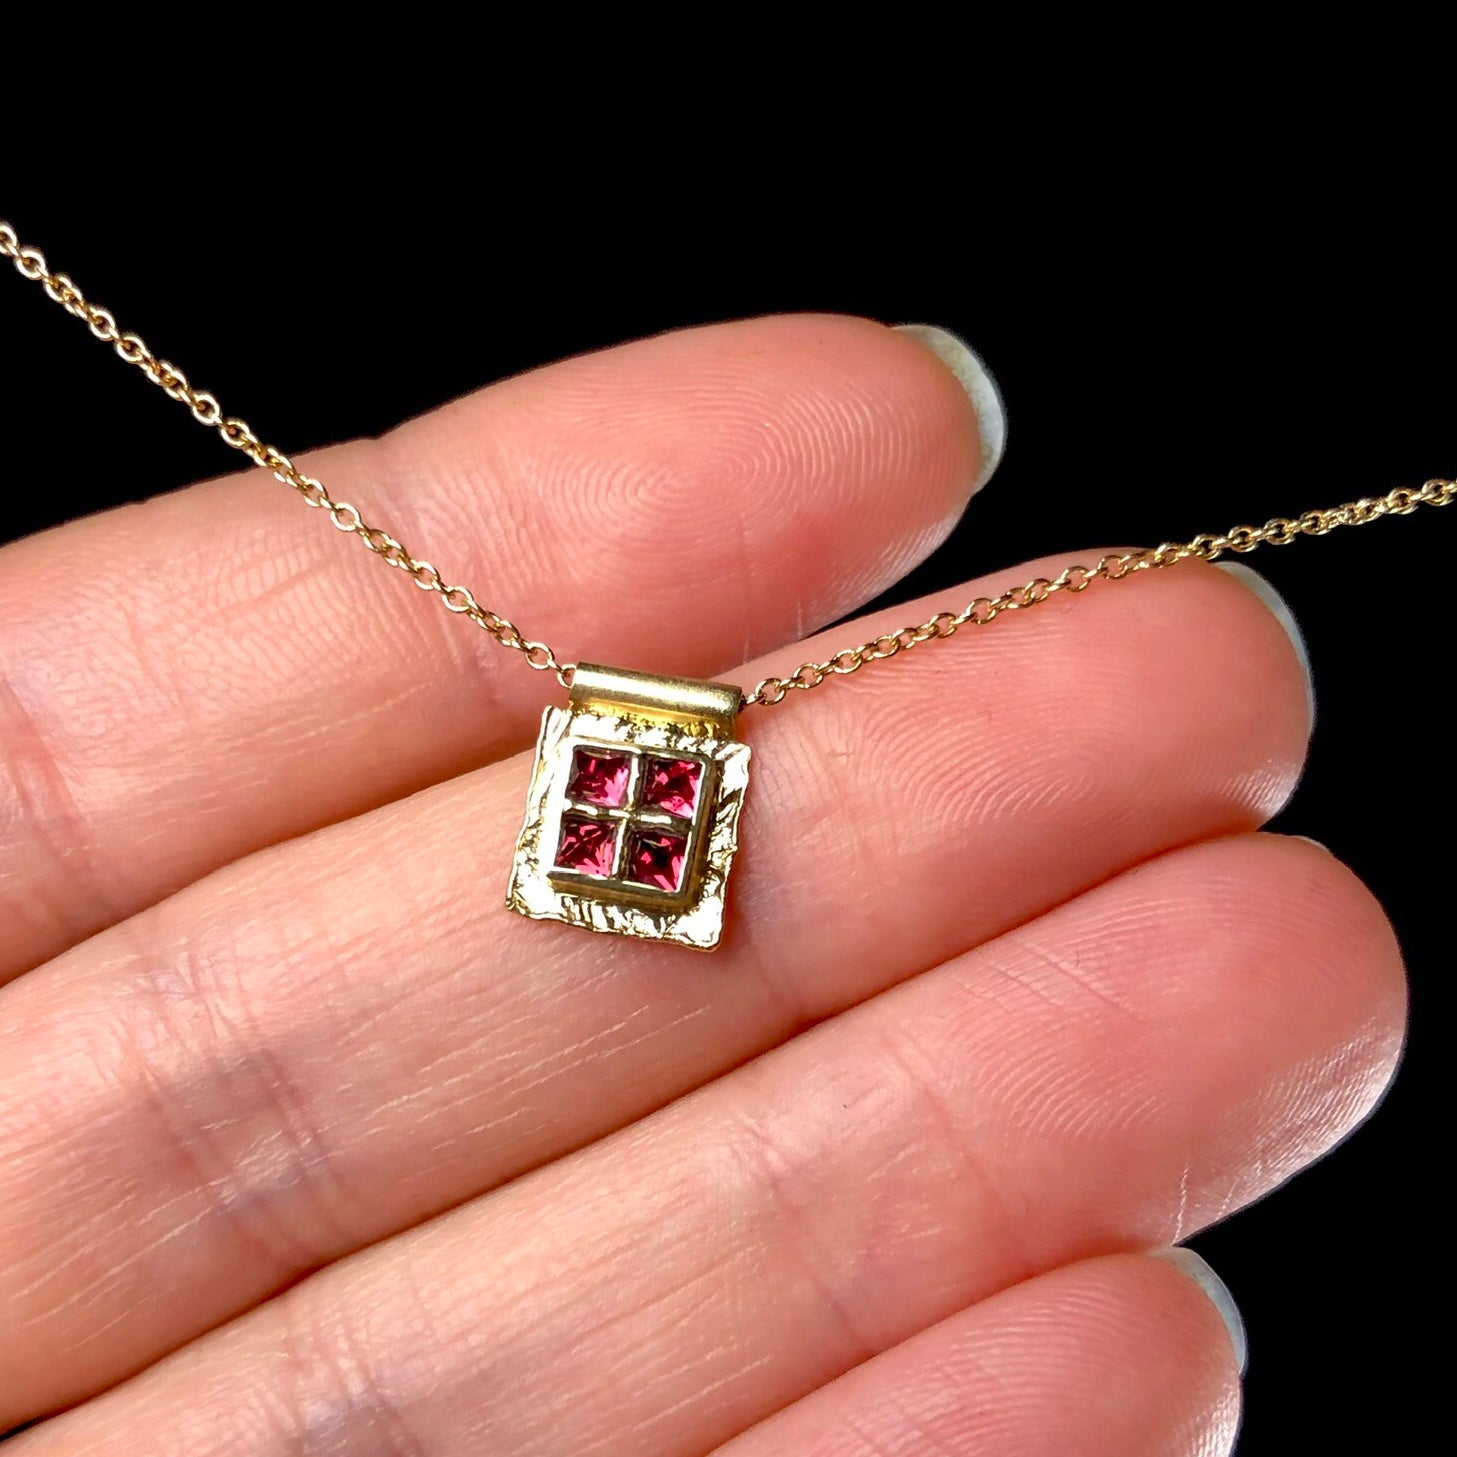 Four red spinel stones in square gold platform on chain shown in hand